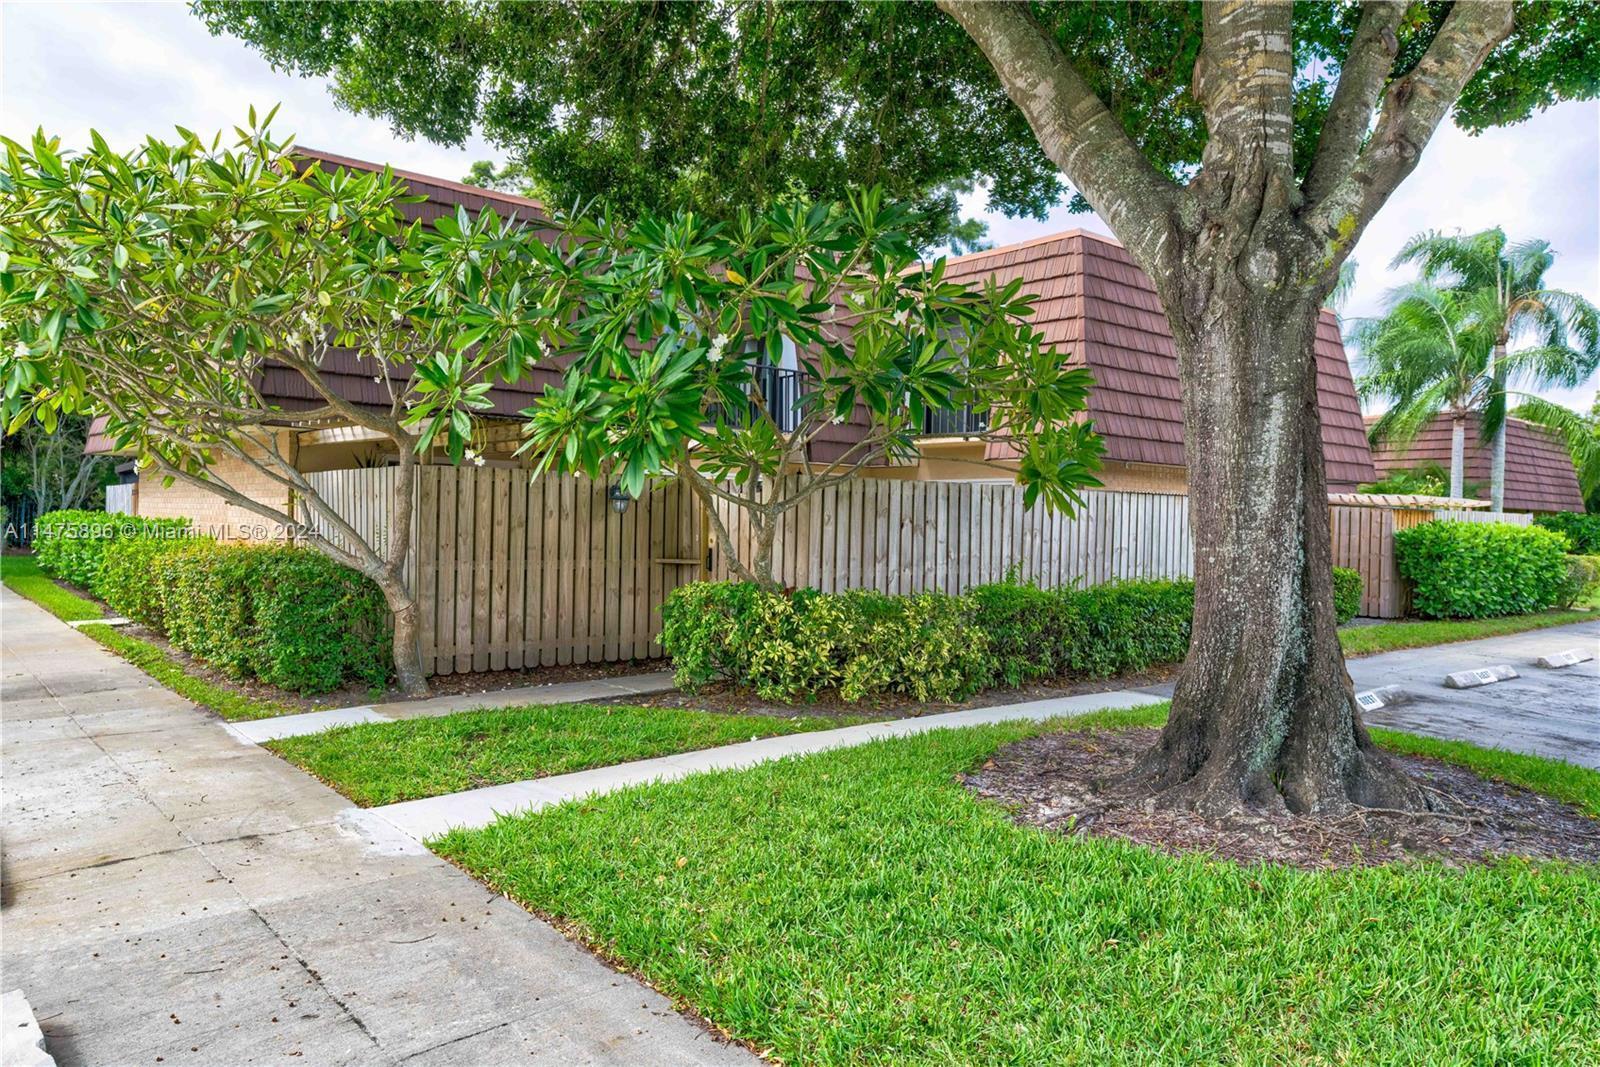 Prime NE exposure Garden Lakes, TH w/shady oak tree outside fenced courtyard area. All 5 sliding glass doors are PGT impact sliders making hurricane prep easy & also block most outside noise. Concrete DiVosta built w/3rd BR or den downstairs. New A/C 2021, gas water heater 2021, DW 2023, freshly painted interior, 2 new toilets, new carpet on stairs/upstairs & more! 2 assigned parking spaces right by courtyard gate & lots of guest parking available by unit. Covered veranda area & oversized storage area in courtyard. Granite countertops in kitchen, Large tile, move in ready w/neutral colors. Tucked away in popular PBG Garden Lakes community, but close to shops, restaurants, North County Park, I-95/Turnpike. Pet friendly & low HOA dues. Community amenities very close by.